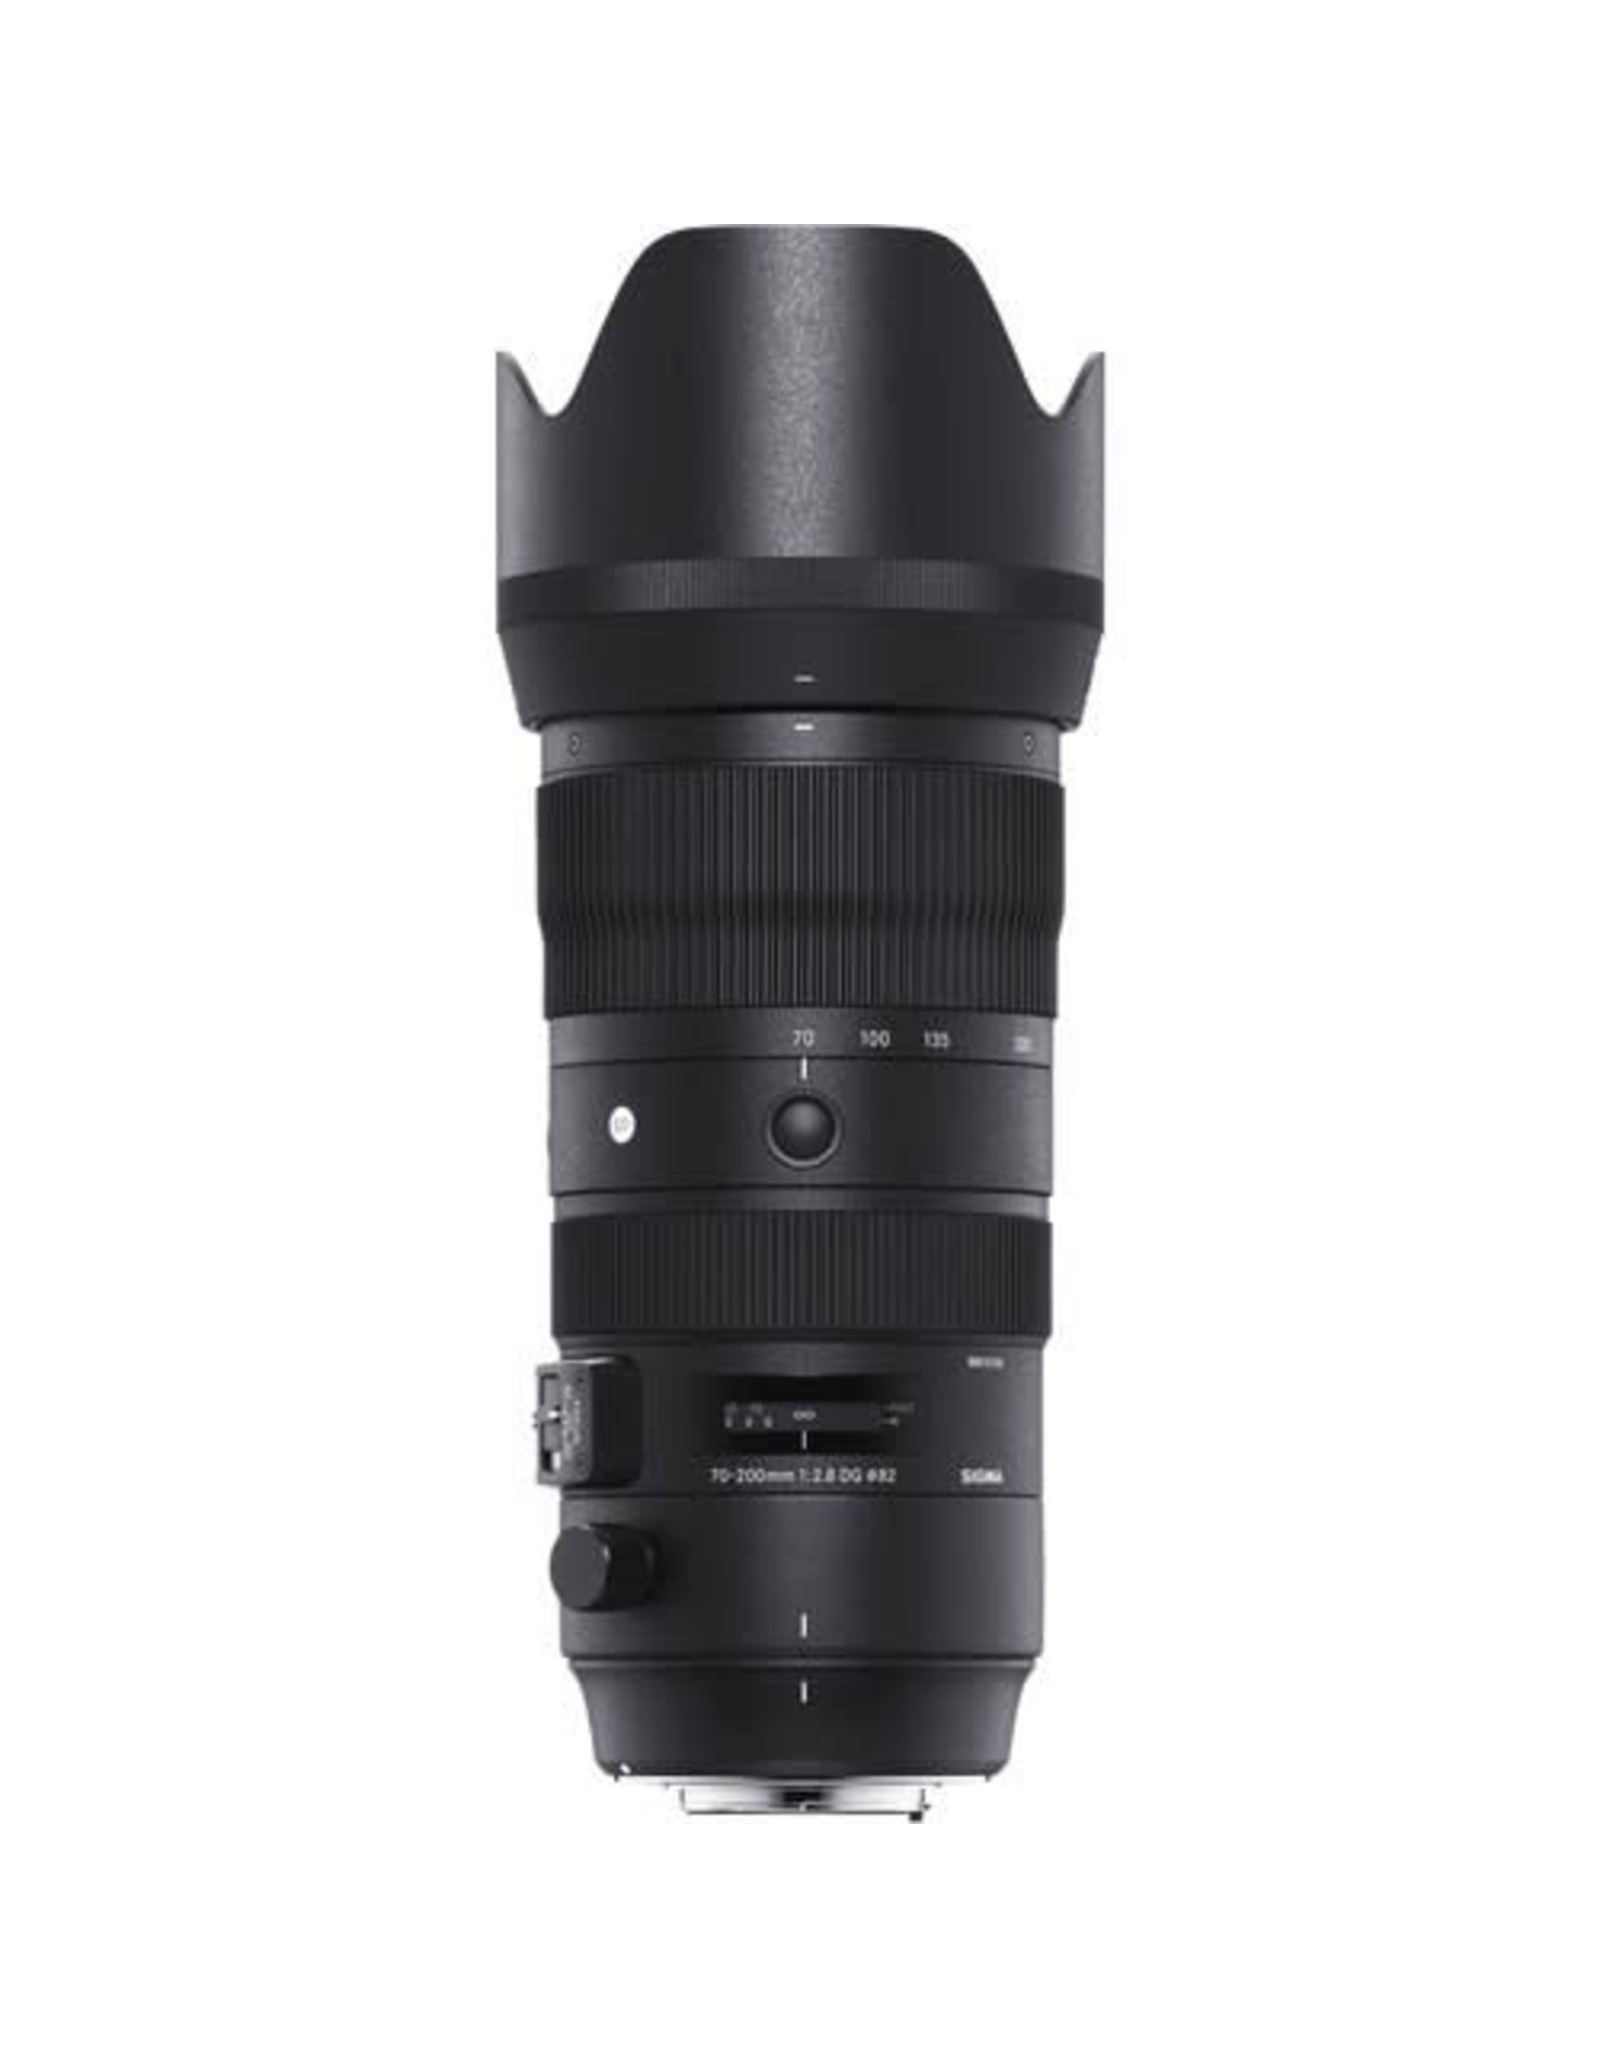 Sigma Sigma 70-200mm f/2.8 DG OS HSM Sports Lens (Specify Mount Type)